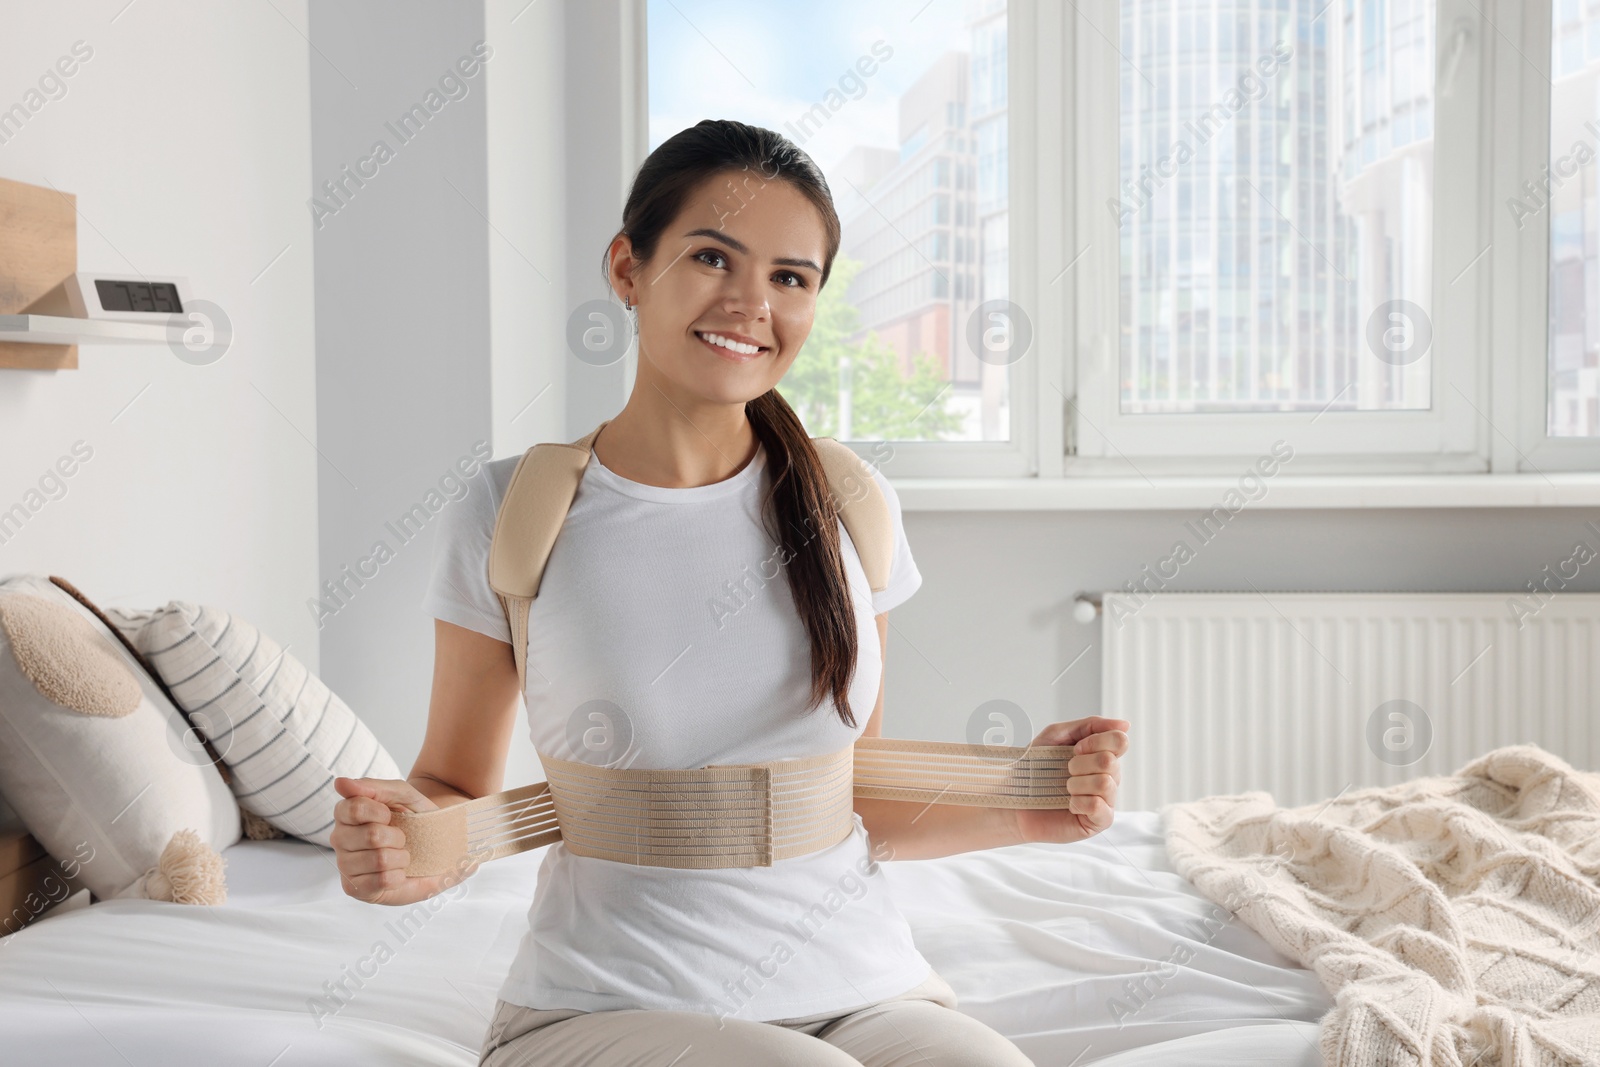 Photo of Woman with orthopedic corset sitting in bedroom